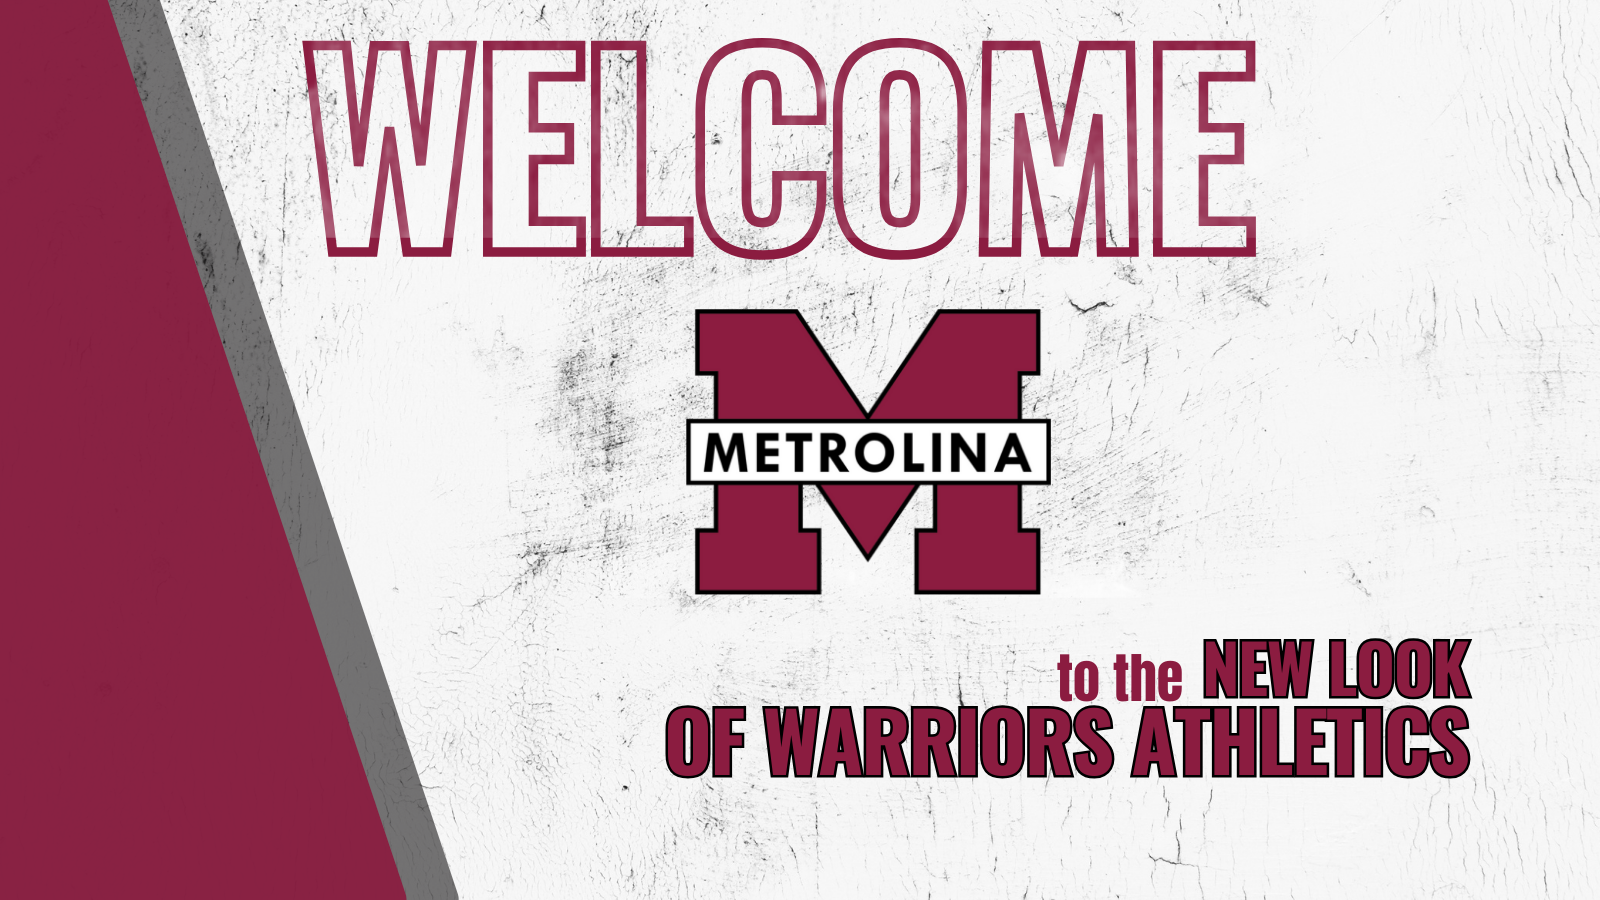 1709828291_CopyofOleyValleyWelcometo1280x320pxTwitterPost13.png - Image for Exciting News for Warriors Athletics!